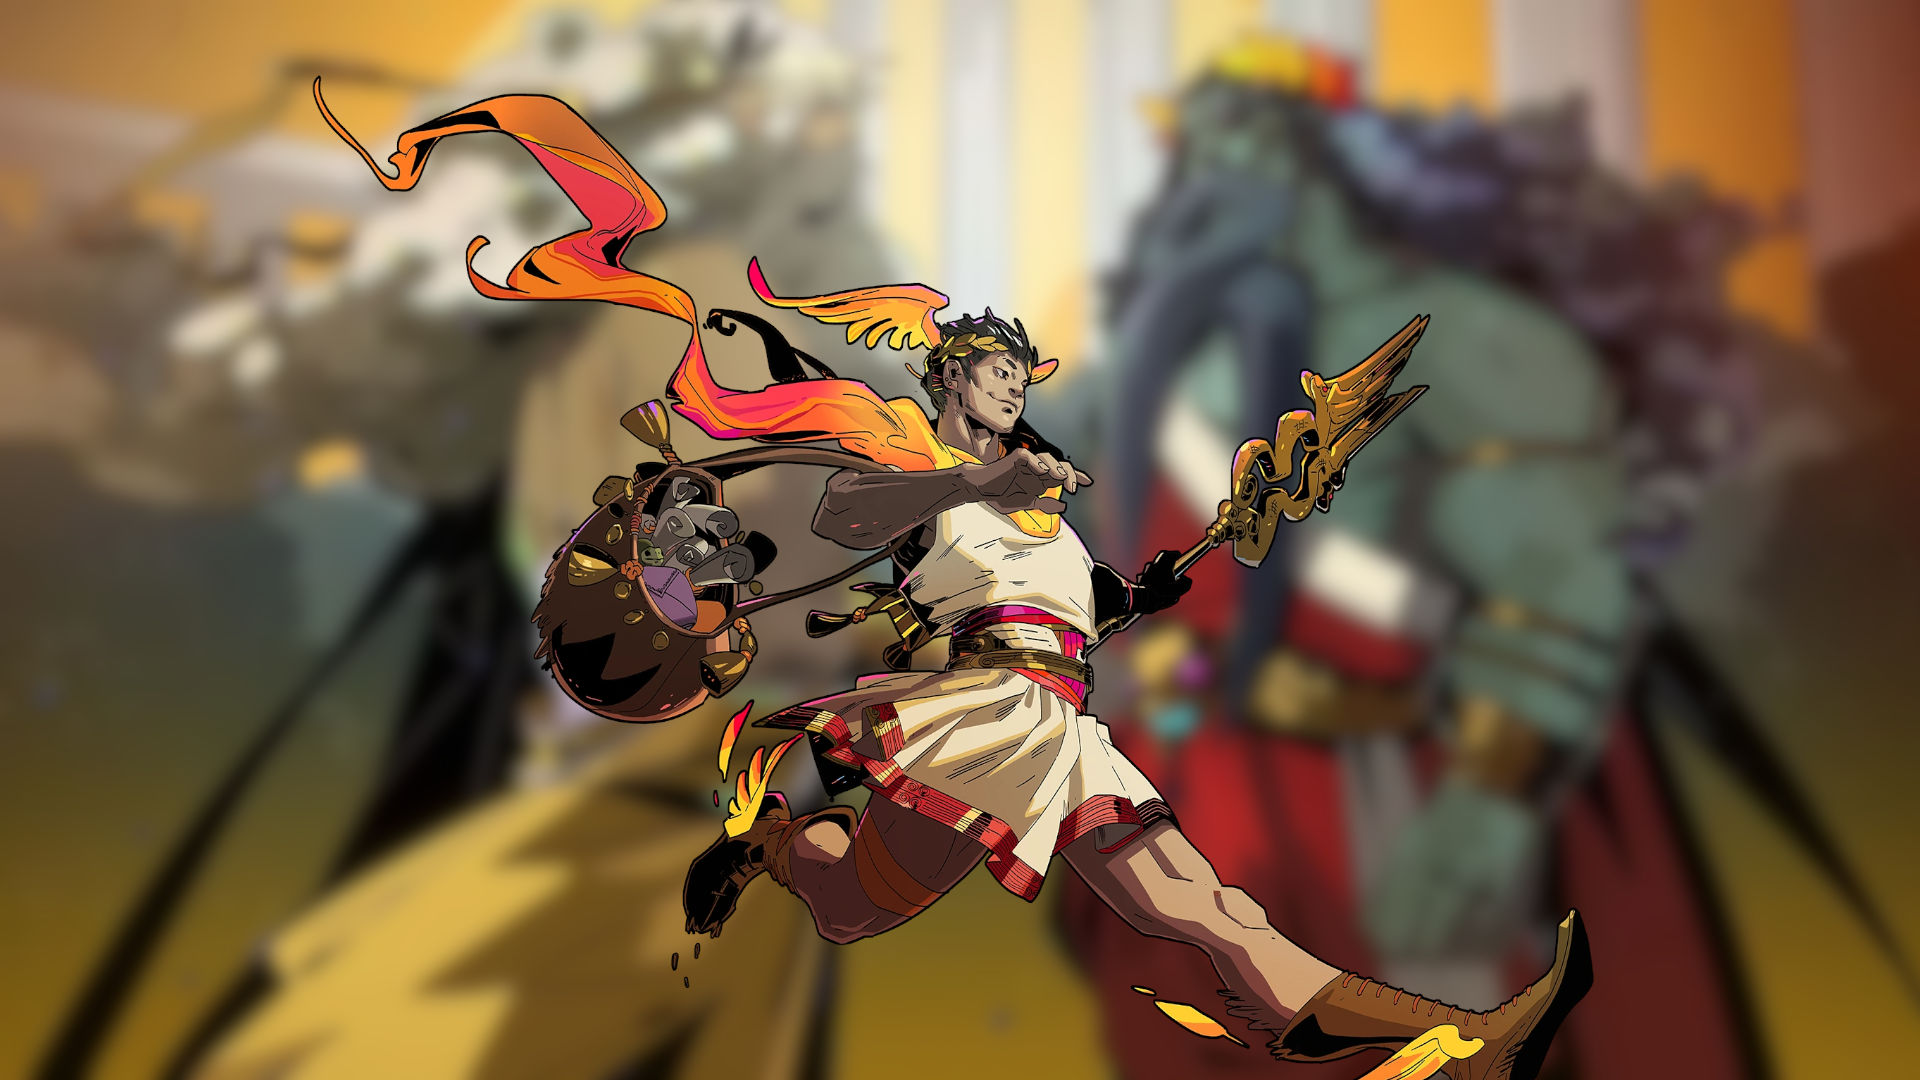 Key art of Hermes, one of the many Hades characters